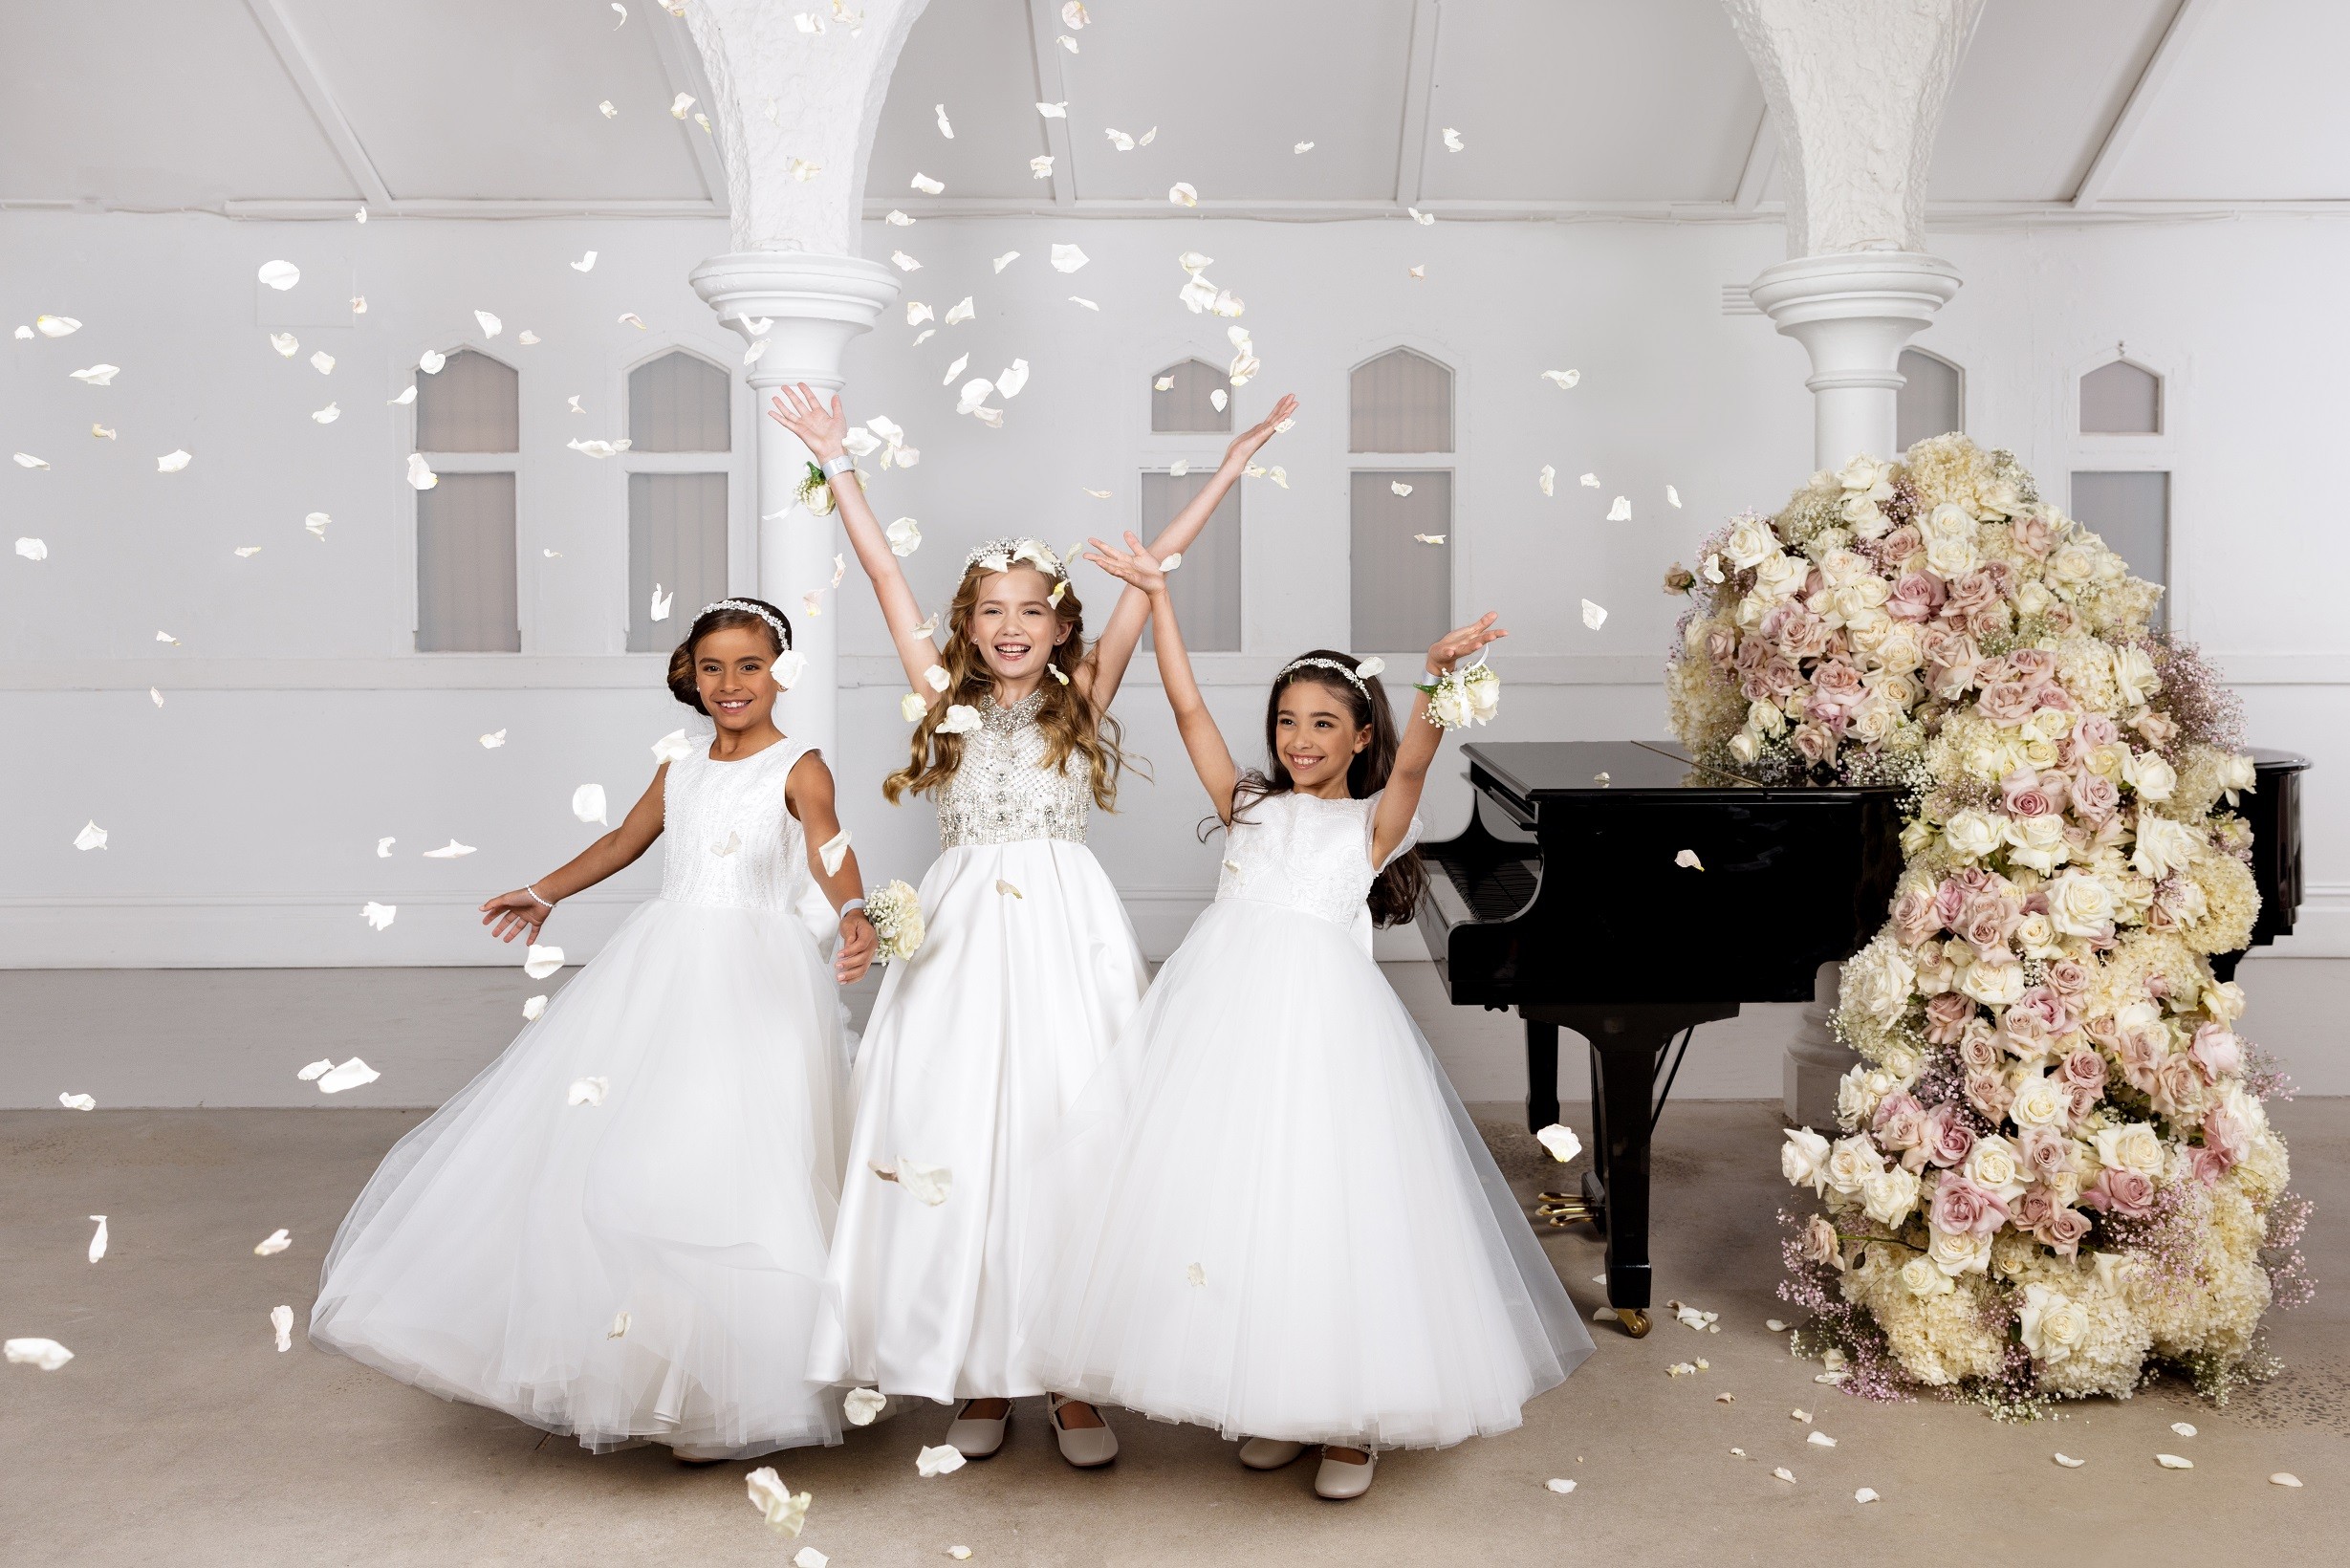 Princess Boutique specialising in Flowergirl Dresses, Pageboy Attire, Christening  Gowns, First Holy Communion Dresses and Boys Suits.